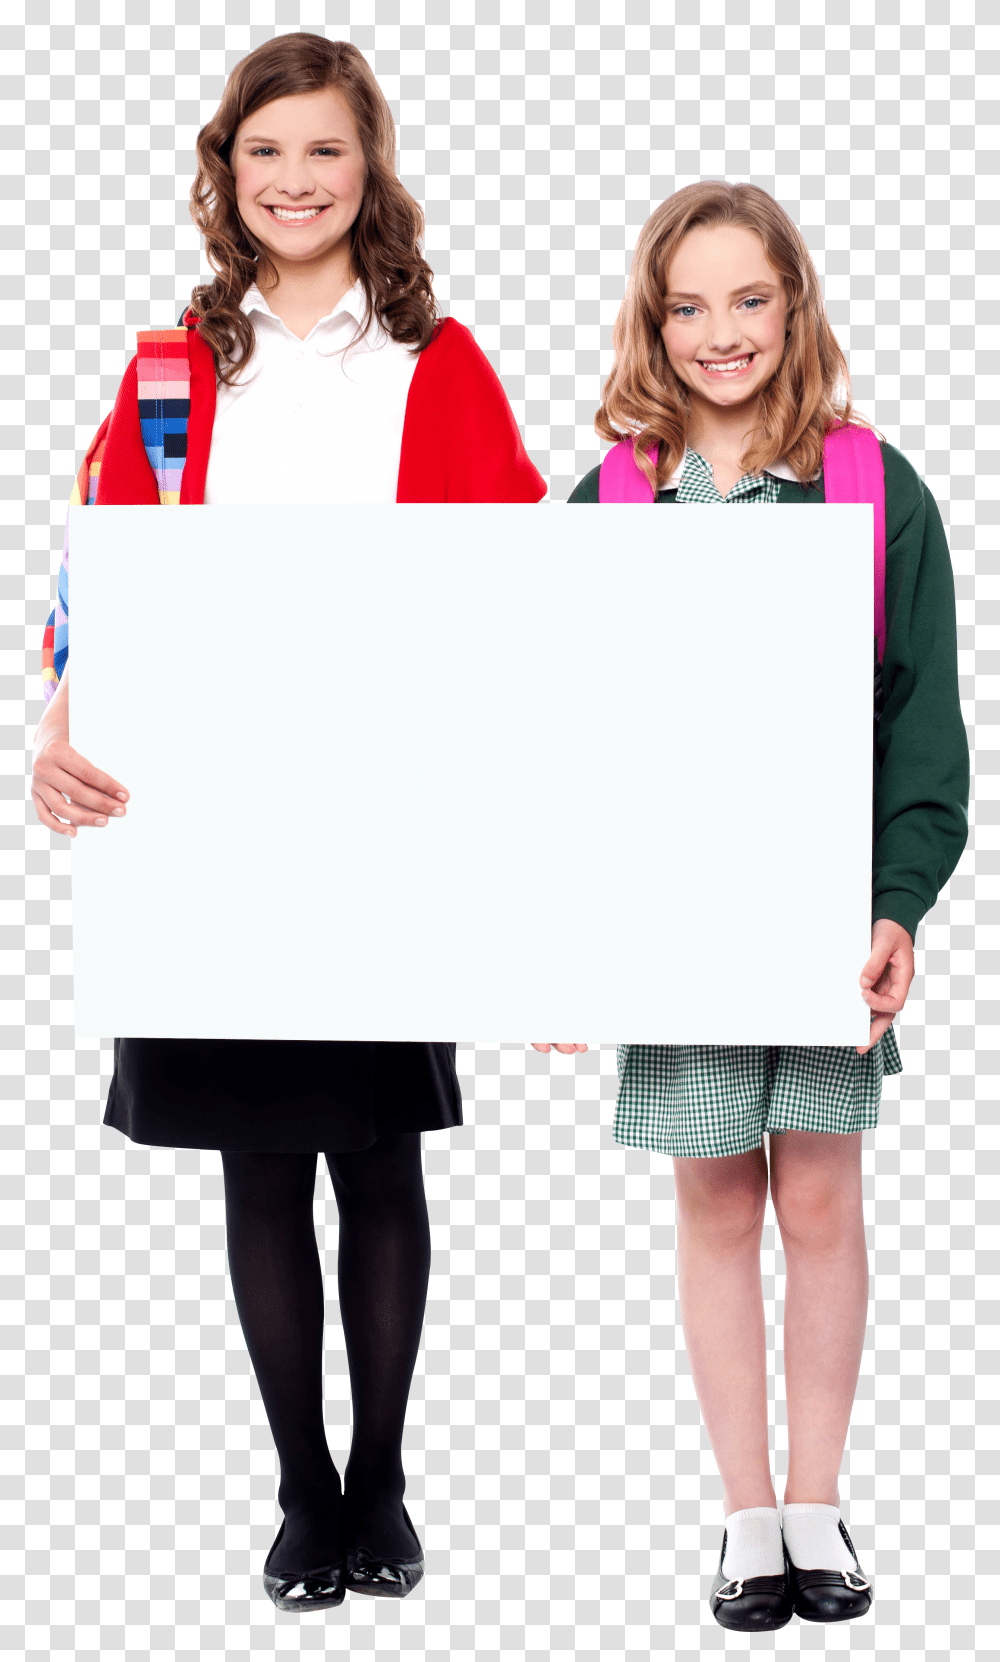 People Holding Banner Free Commercial Use Image Student With Banner Transparent Png